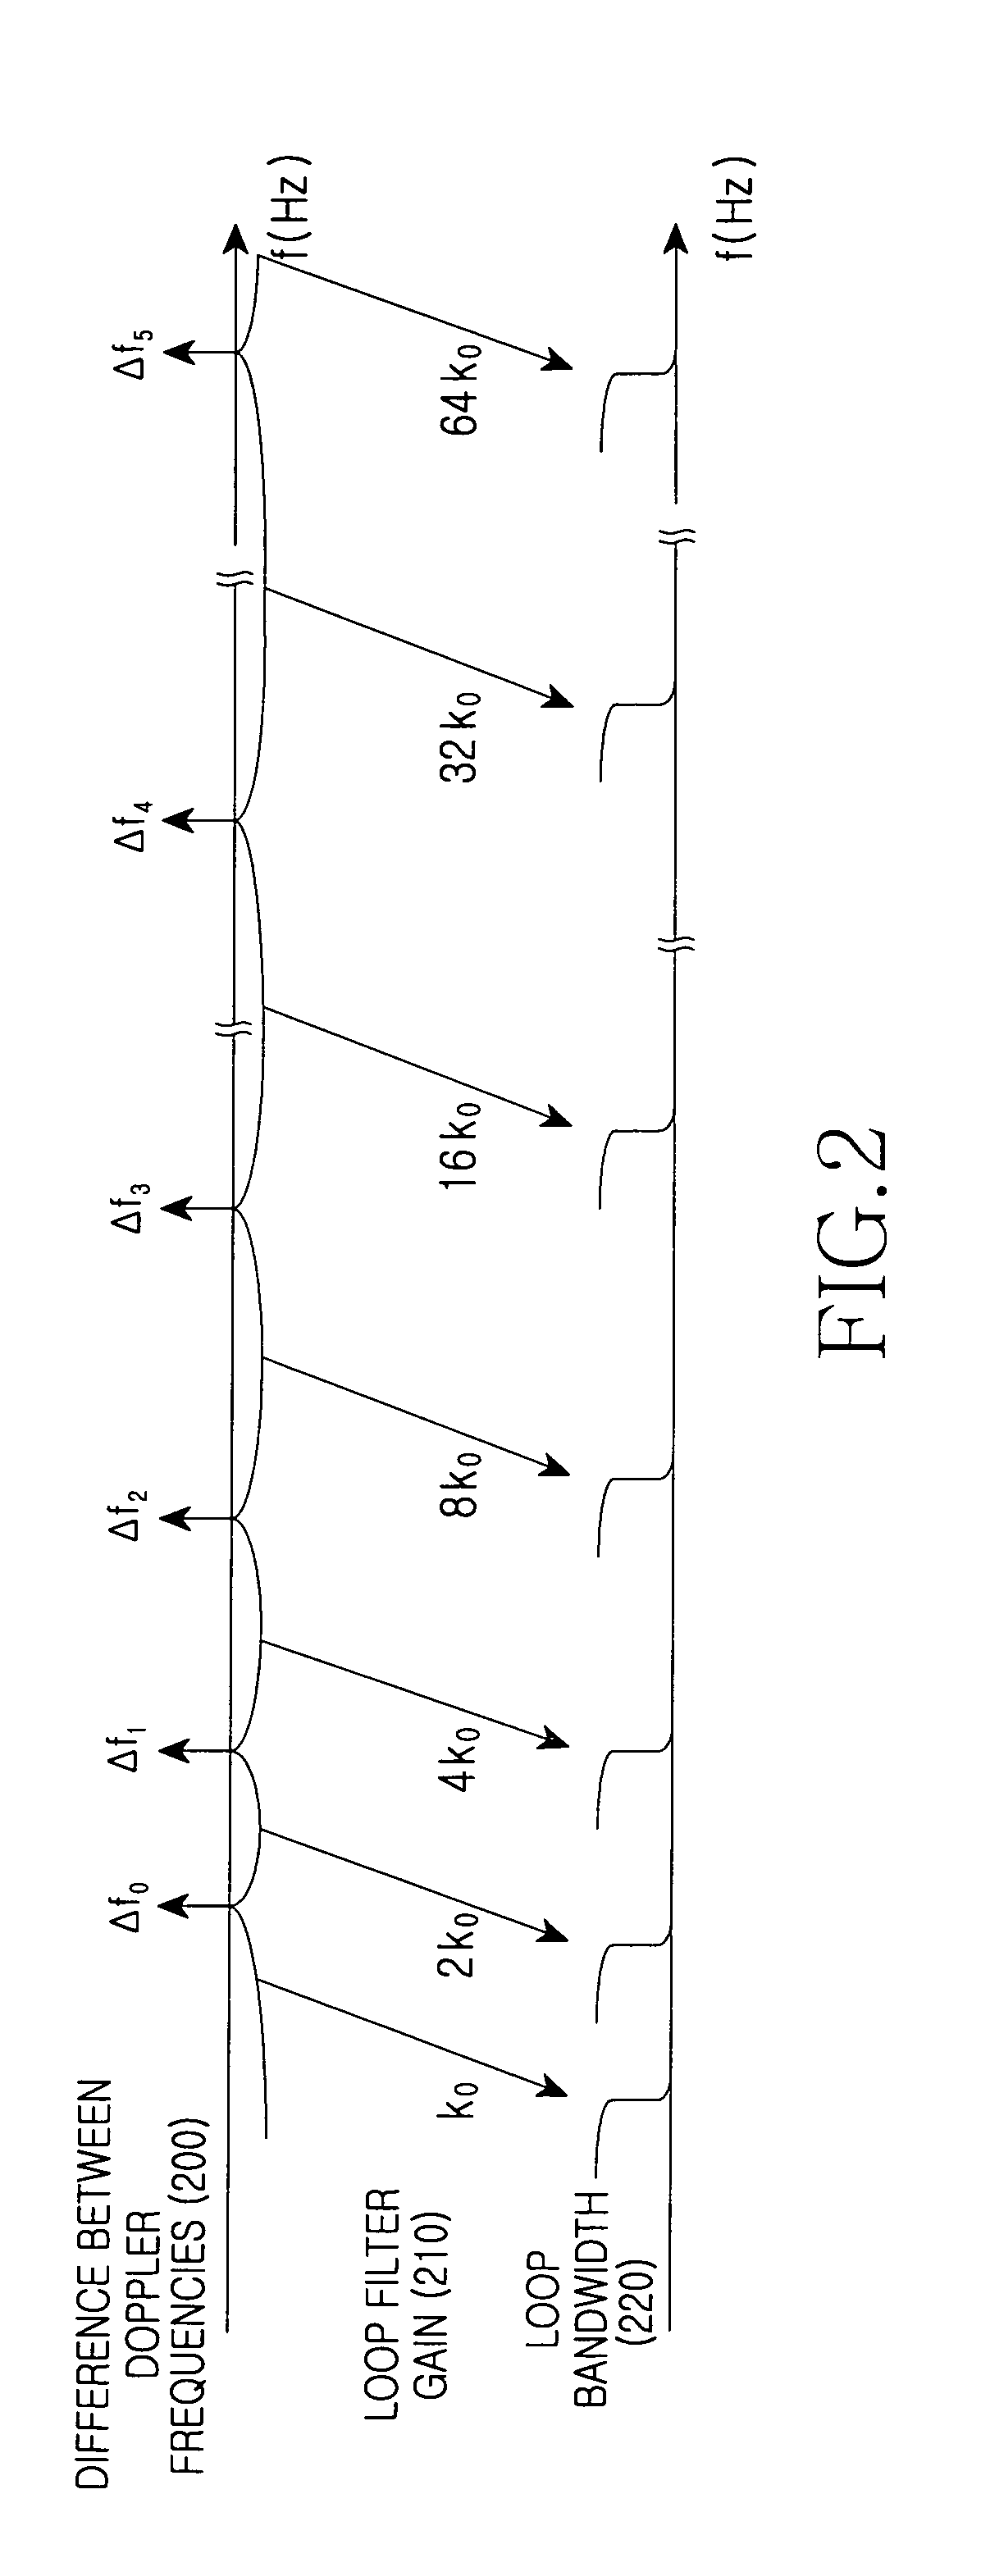 Device and method for adjusting loop filter gain in automatic frequency controller